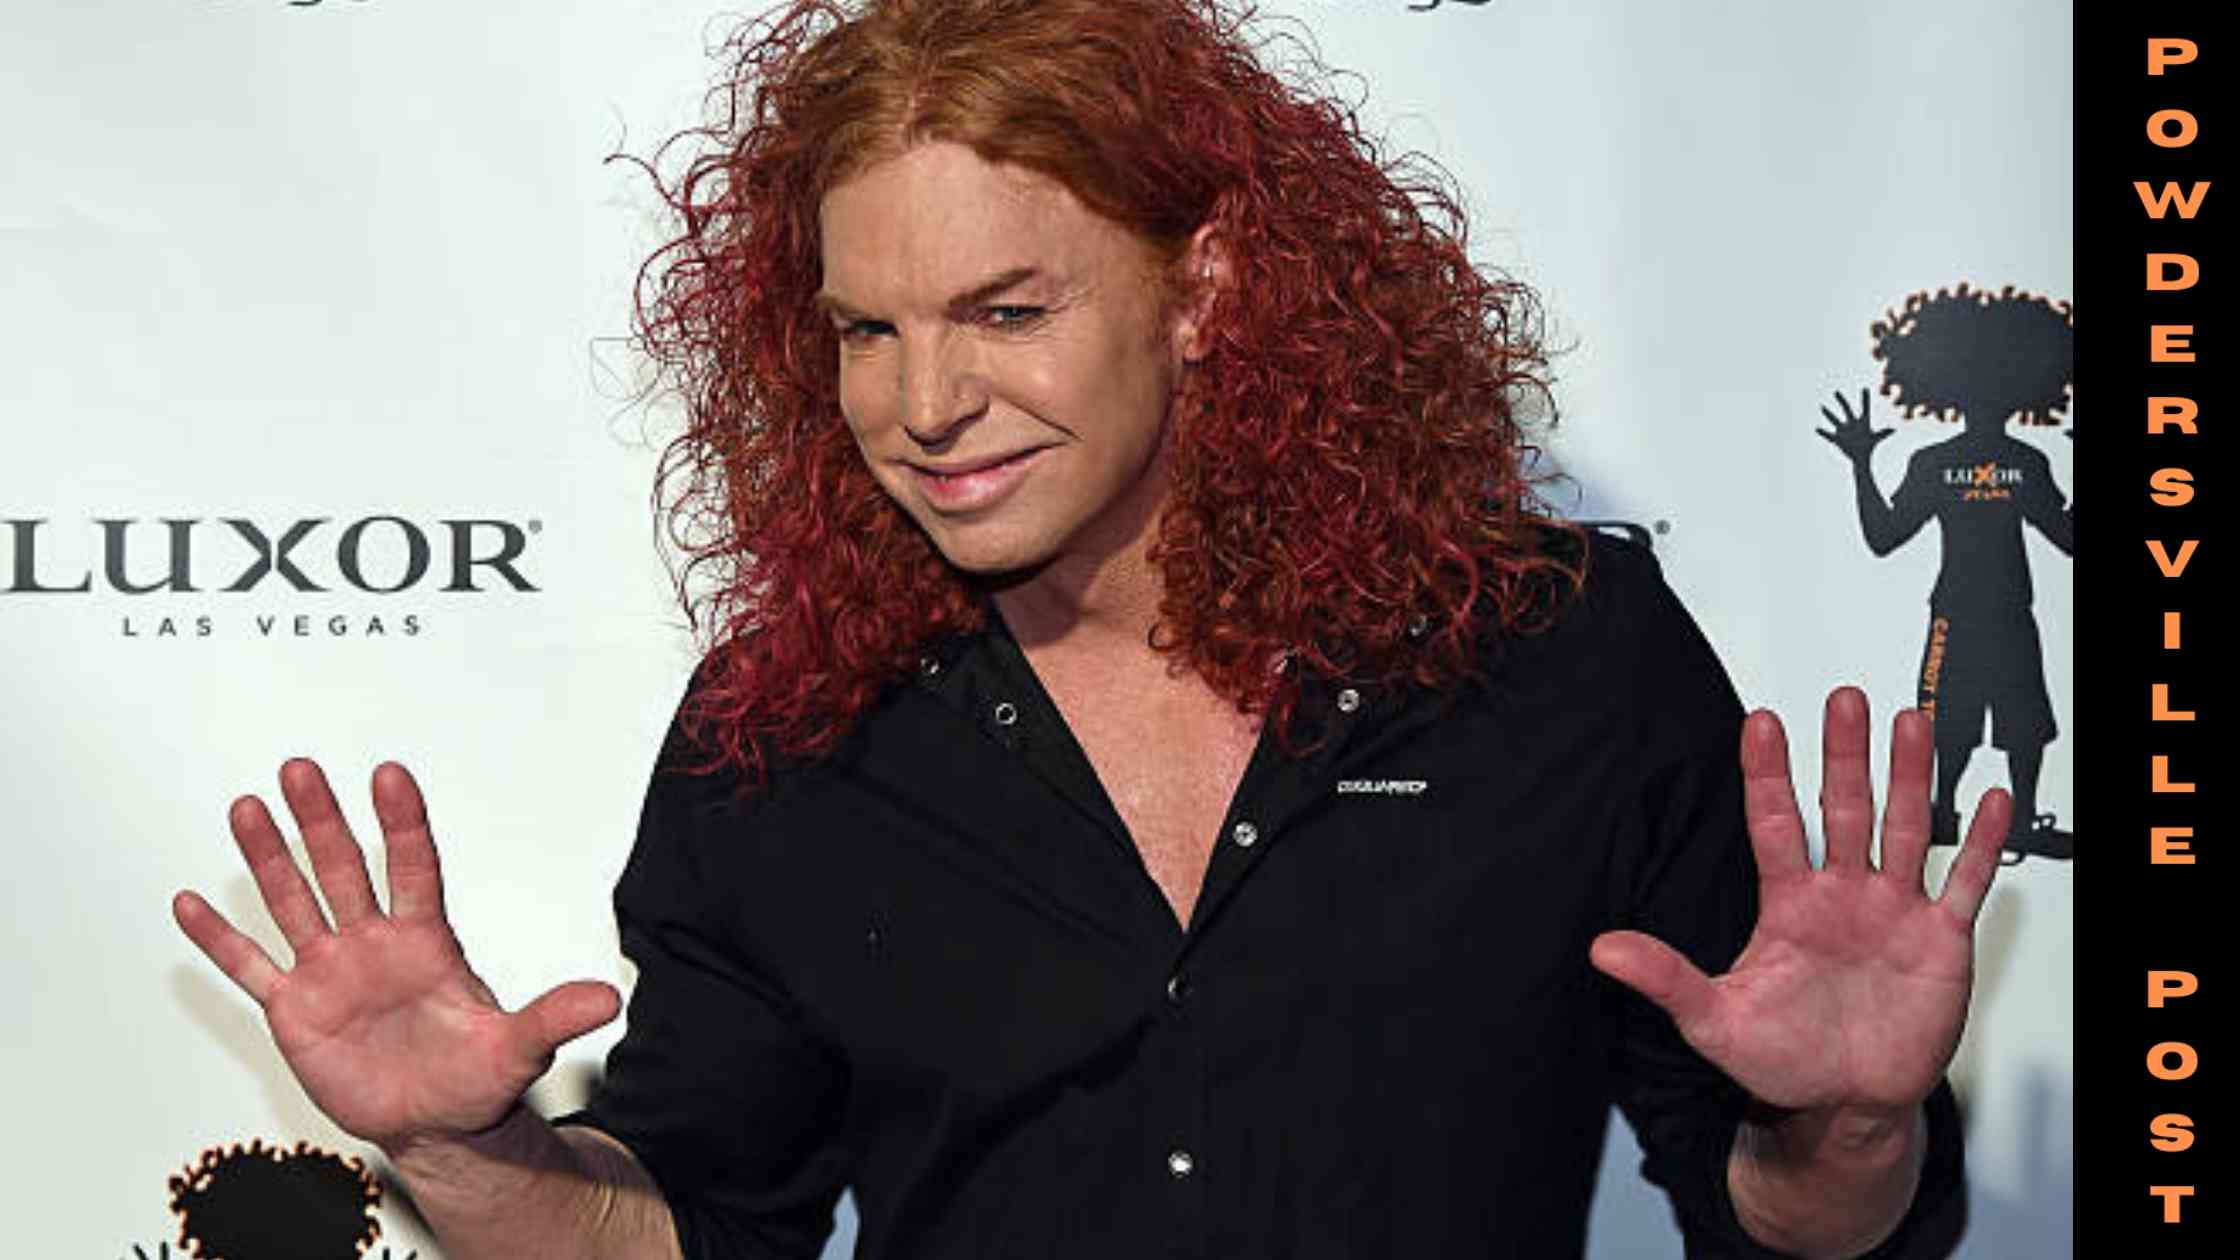 Are Carrot Top's Comments Truly About Gay Issues